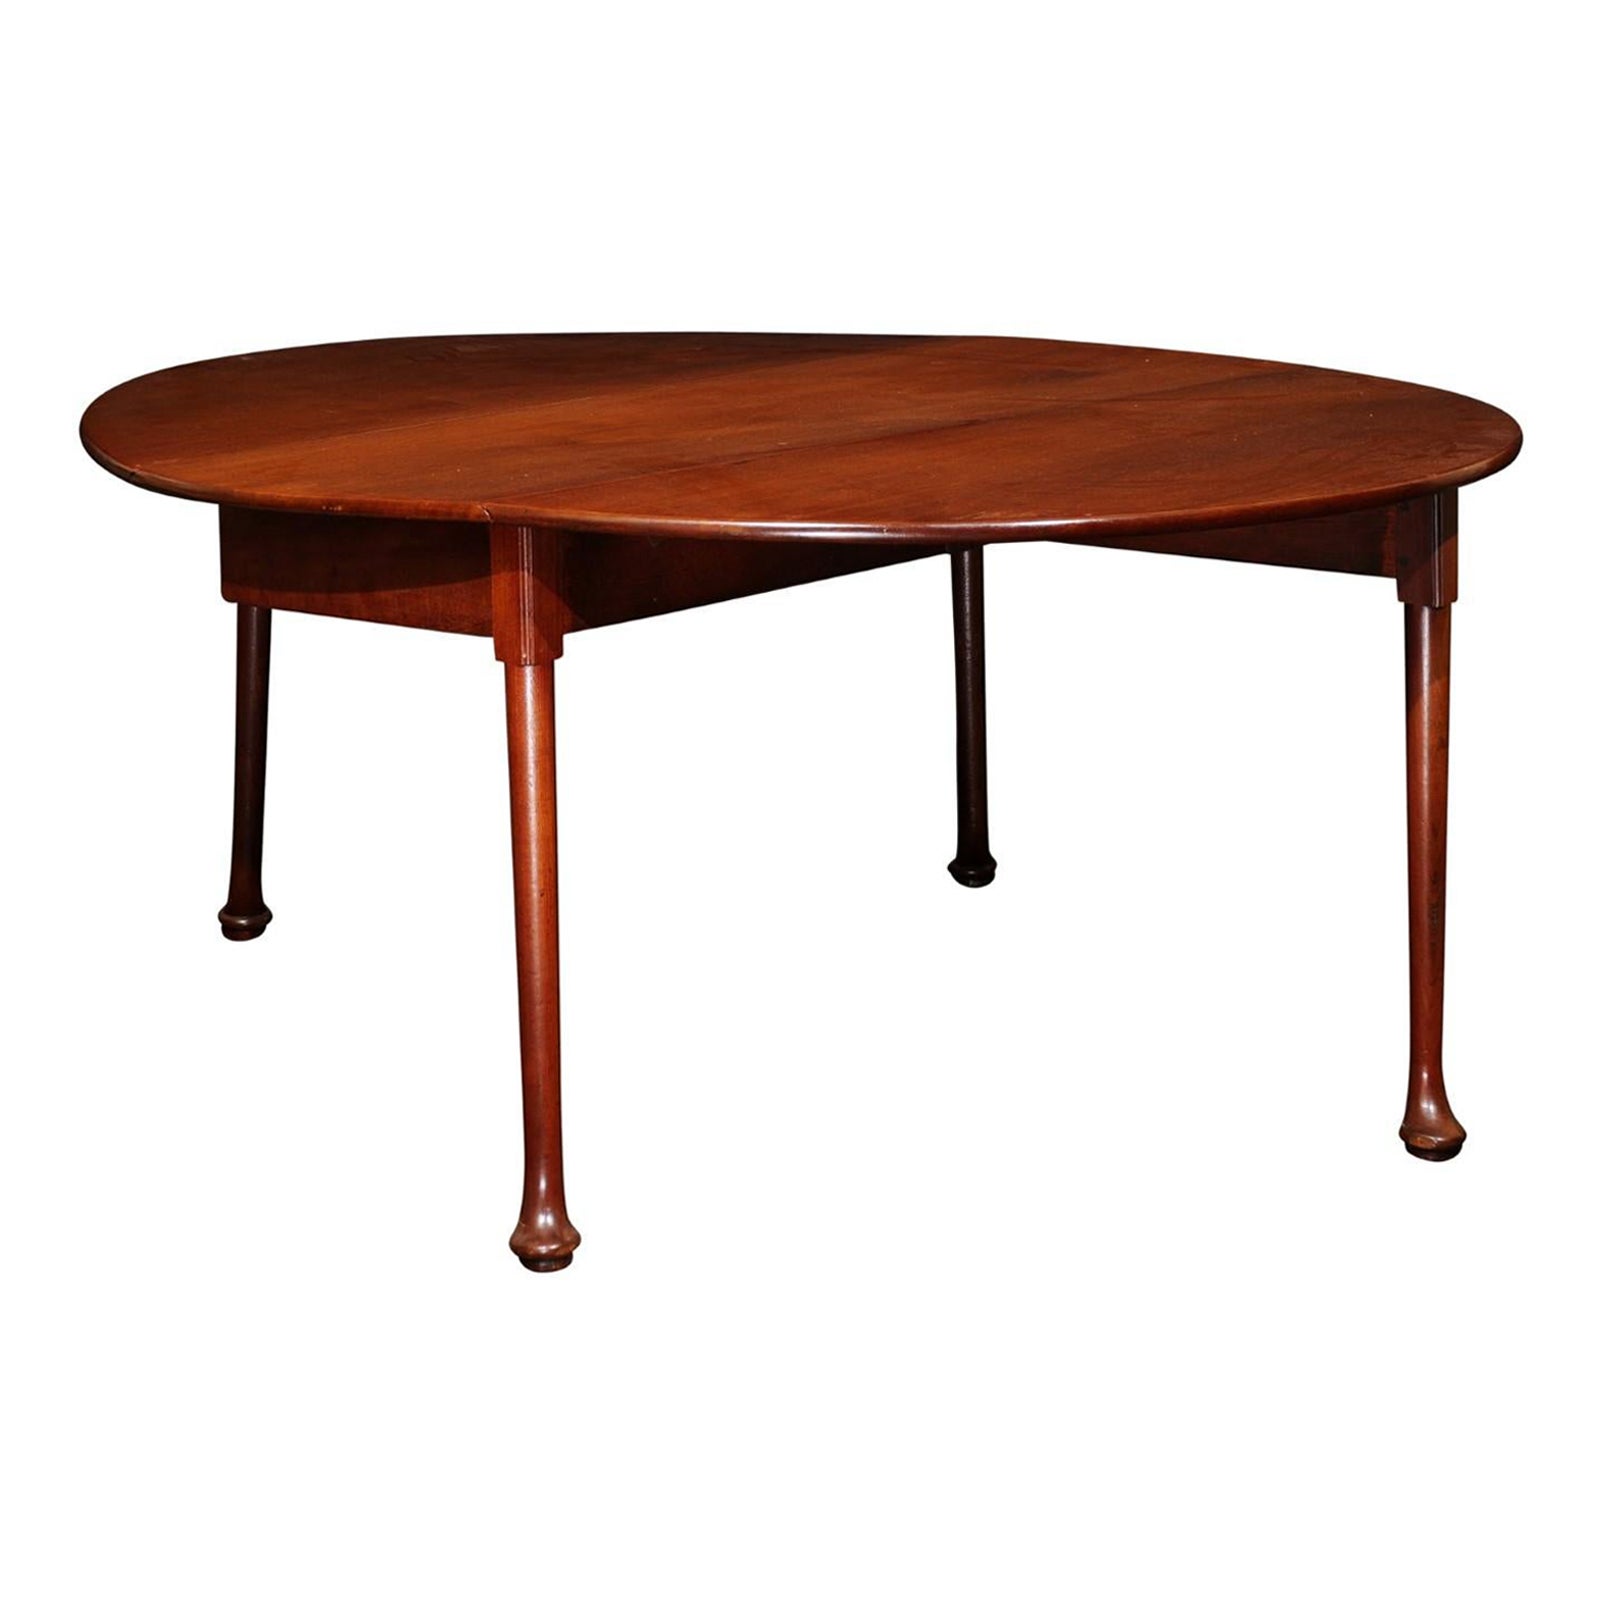  Mid-18th C English George II Mahogany Drop Leaf Oval Dining Table with Pad Feet (Table de salle à manger ovale à feuilles tombantes et pieds pad)